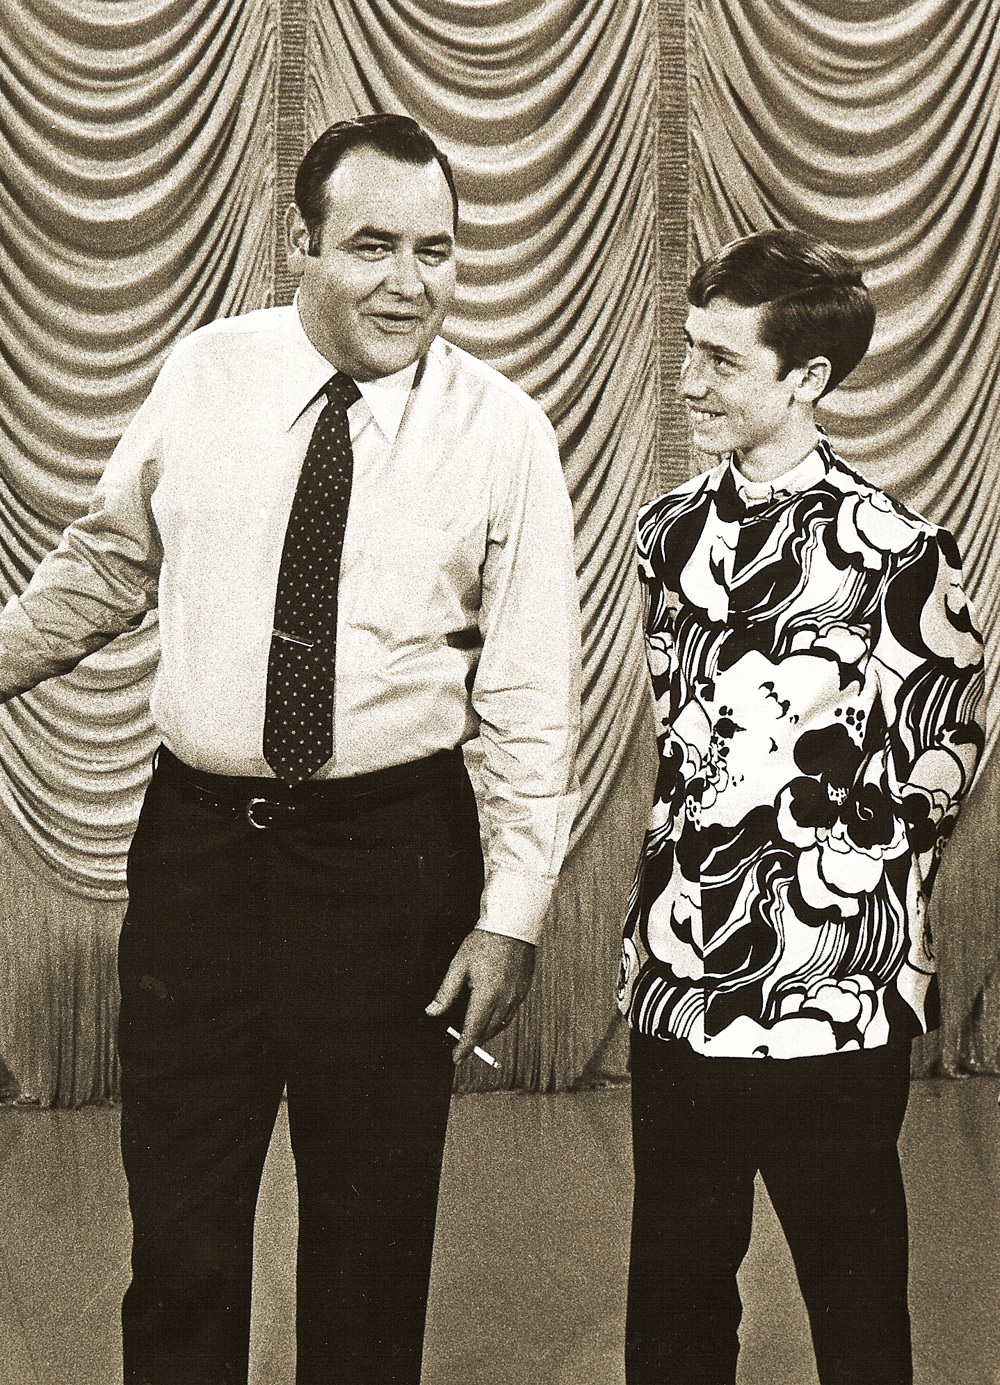 Craig as special guest on Jonathan Winters show